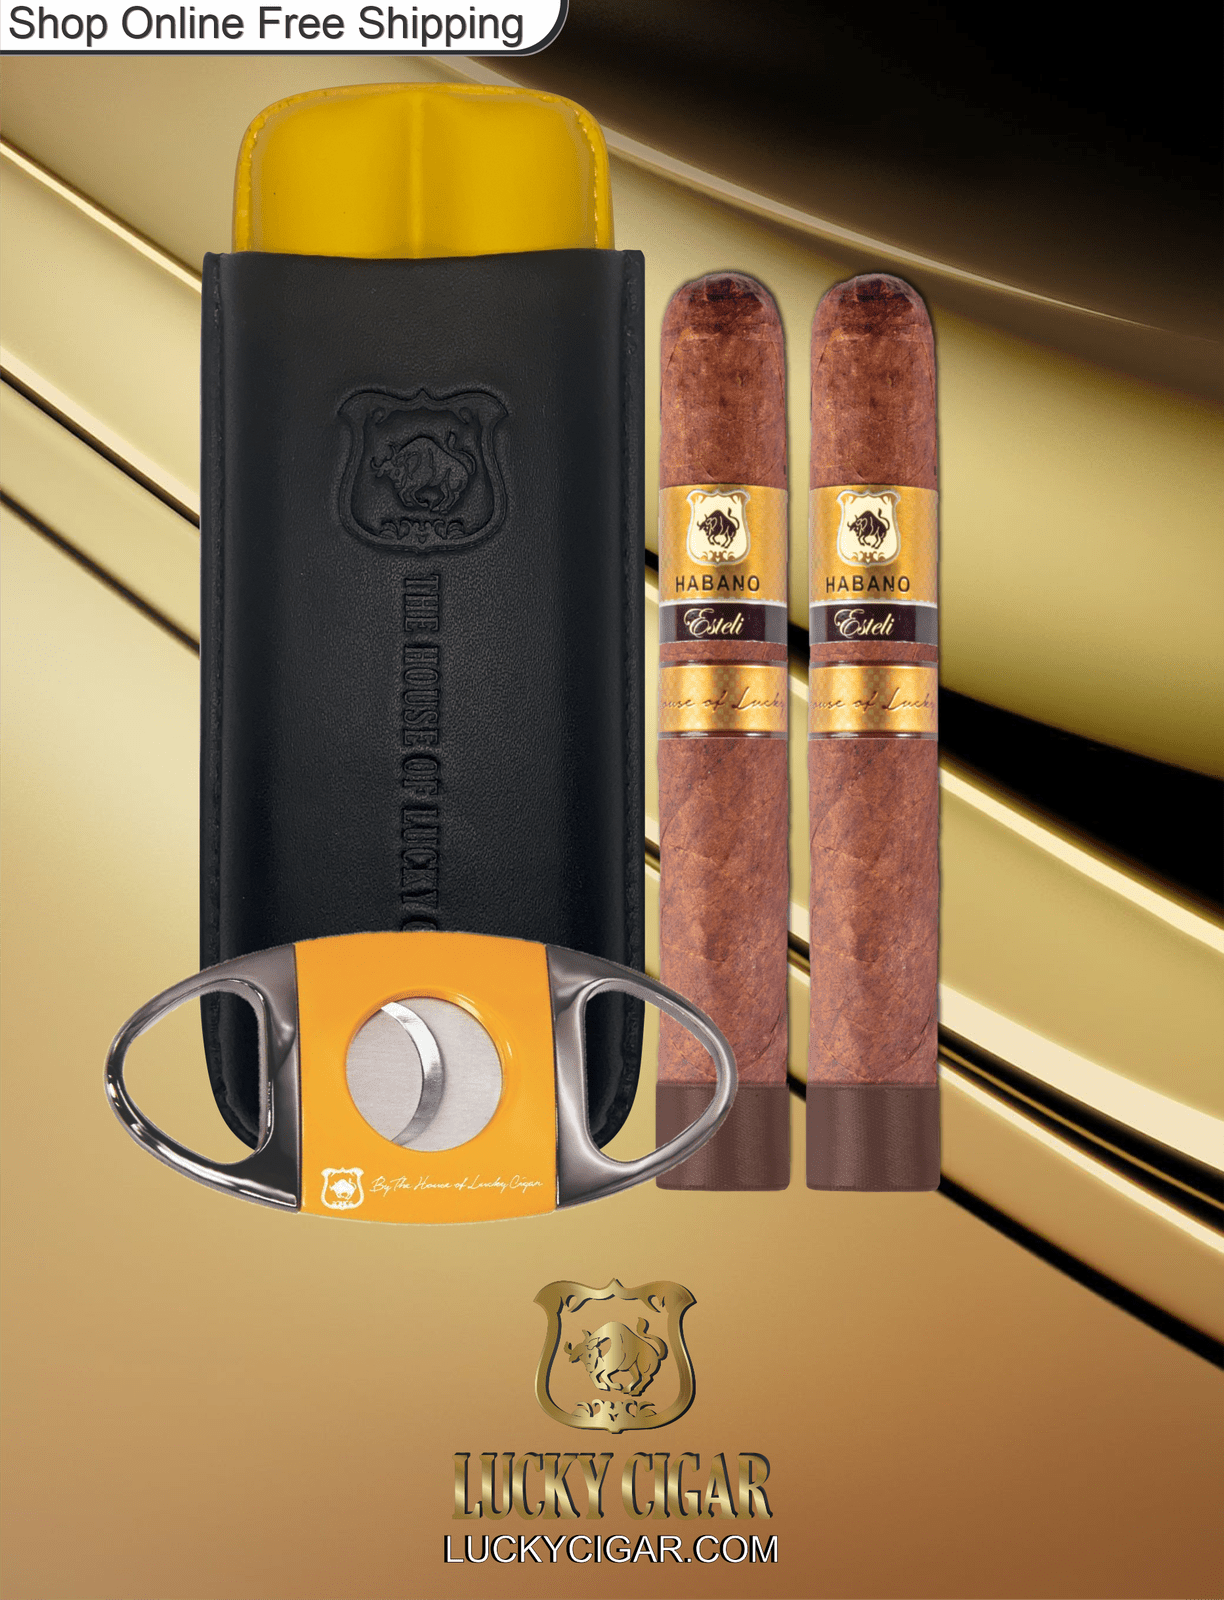 Cigar Lifestyle Accessories: Travel Humidor Case with Cutter and 2 Cigars